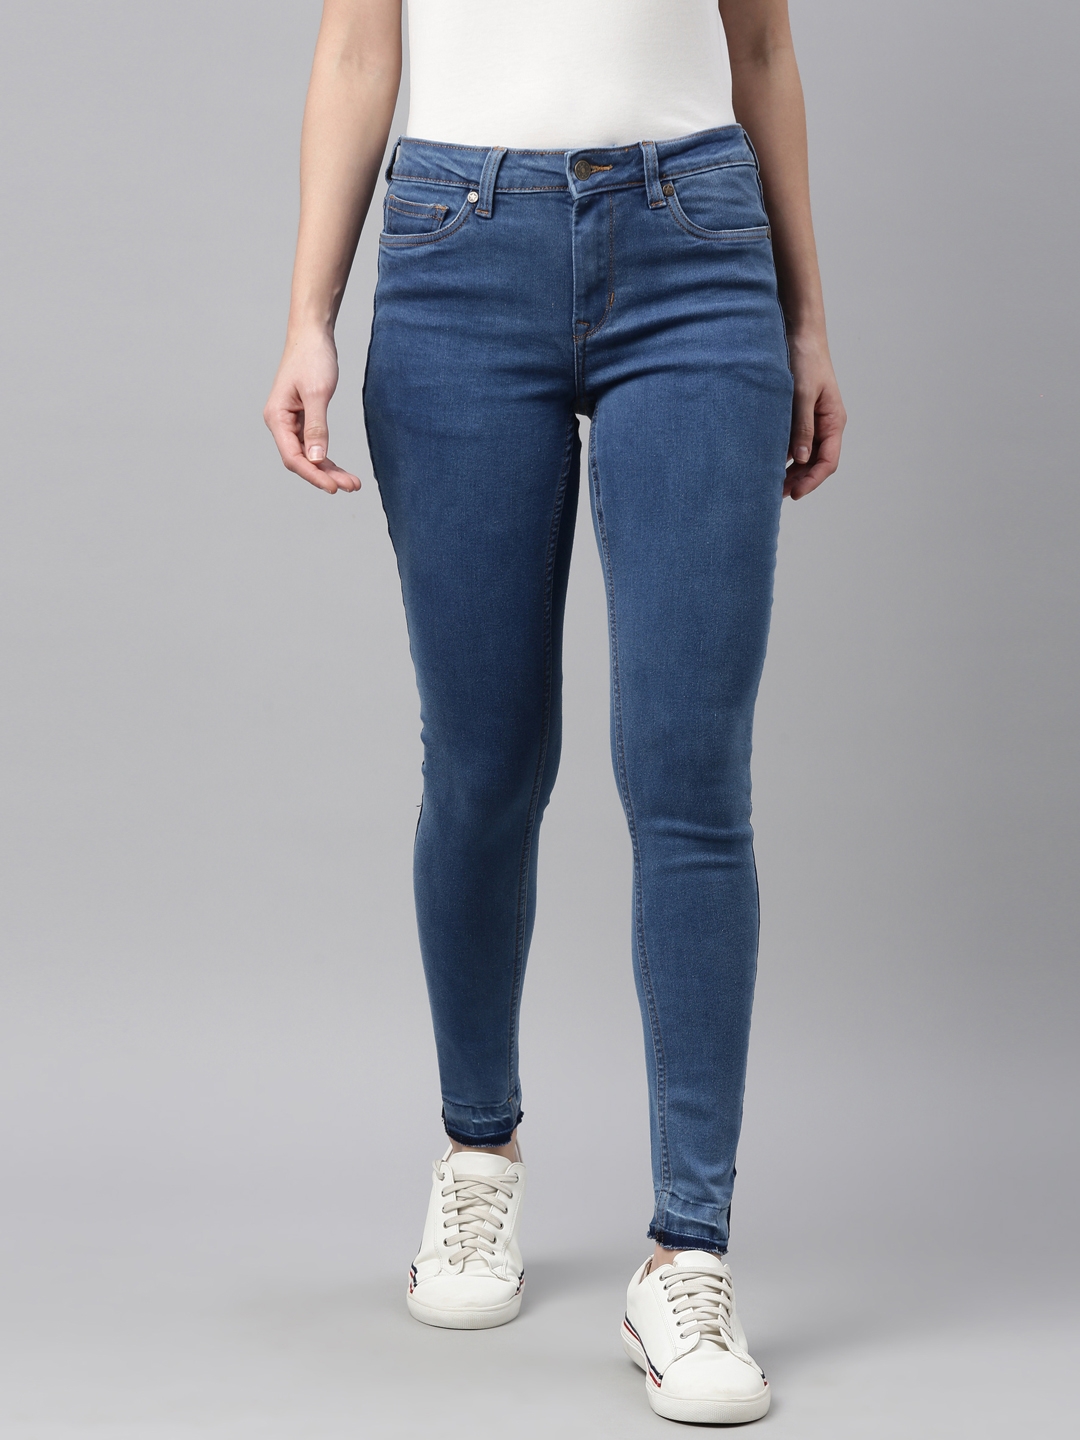 Enviously Young | Enviously Young Women's Blue Jeans